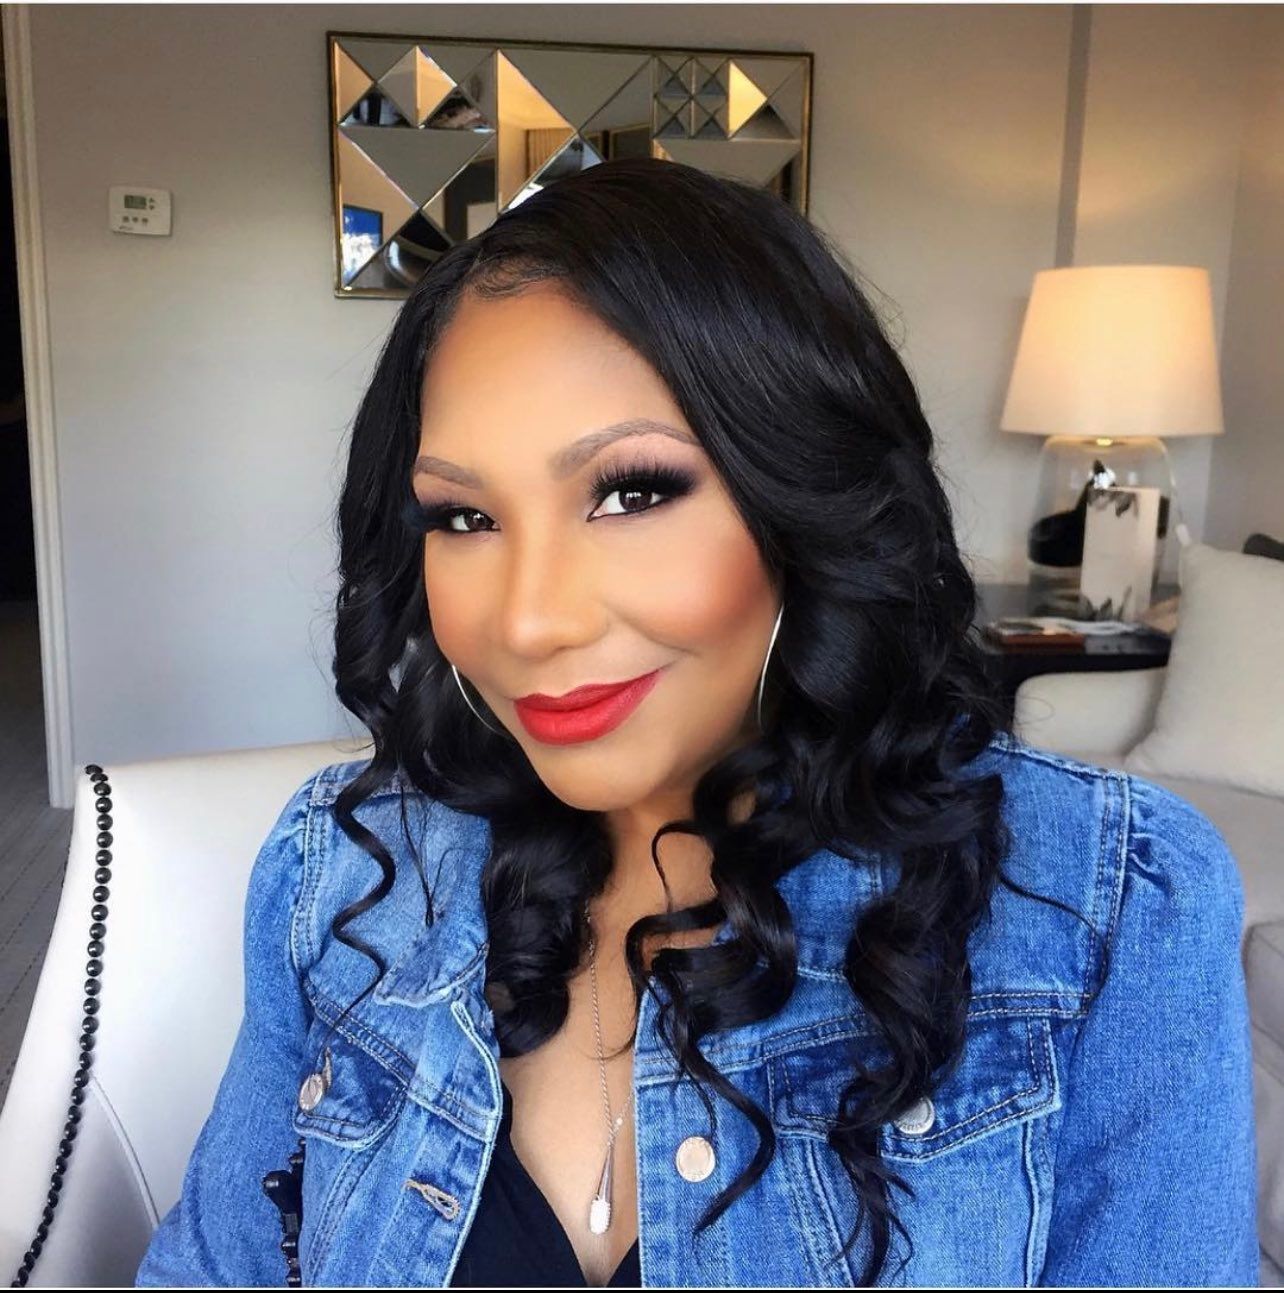 Traci Braxton family: Know about her sisters, husband, son and net worth